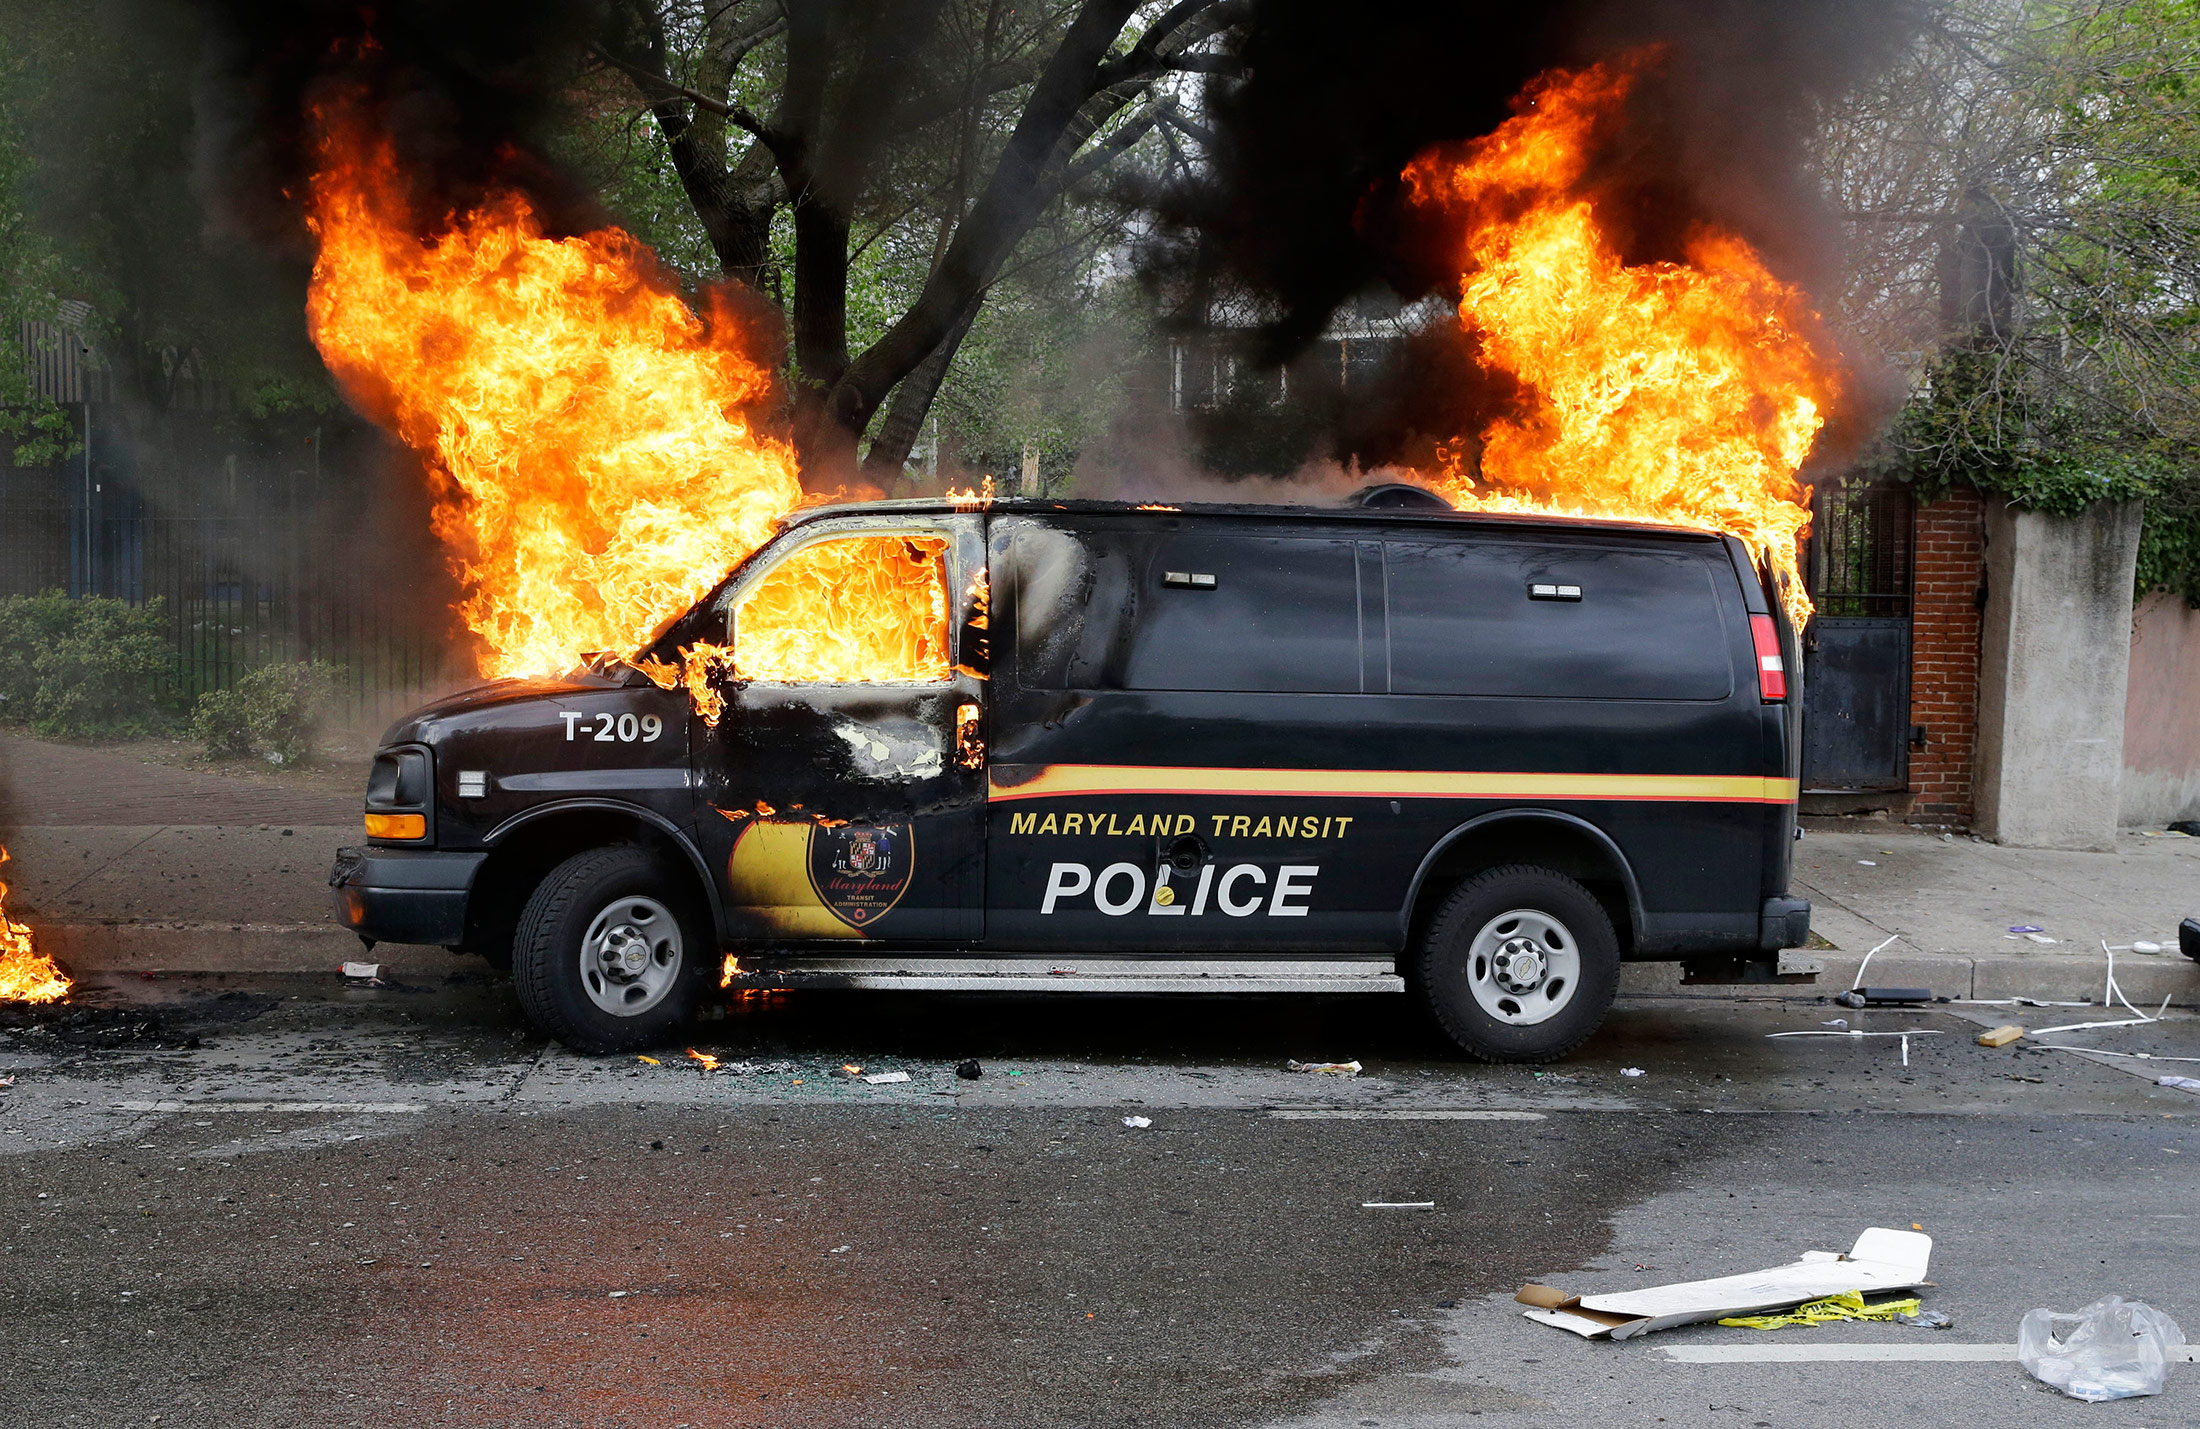 A police vehicle burns, Monday, April 27, 2015, during unrest following the funeral of Freddie Gray in Baltimore.
